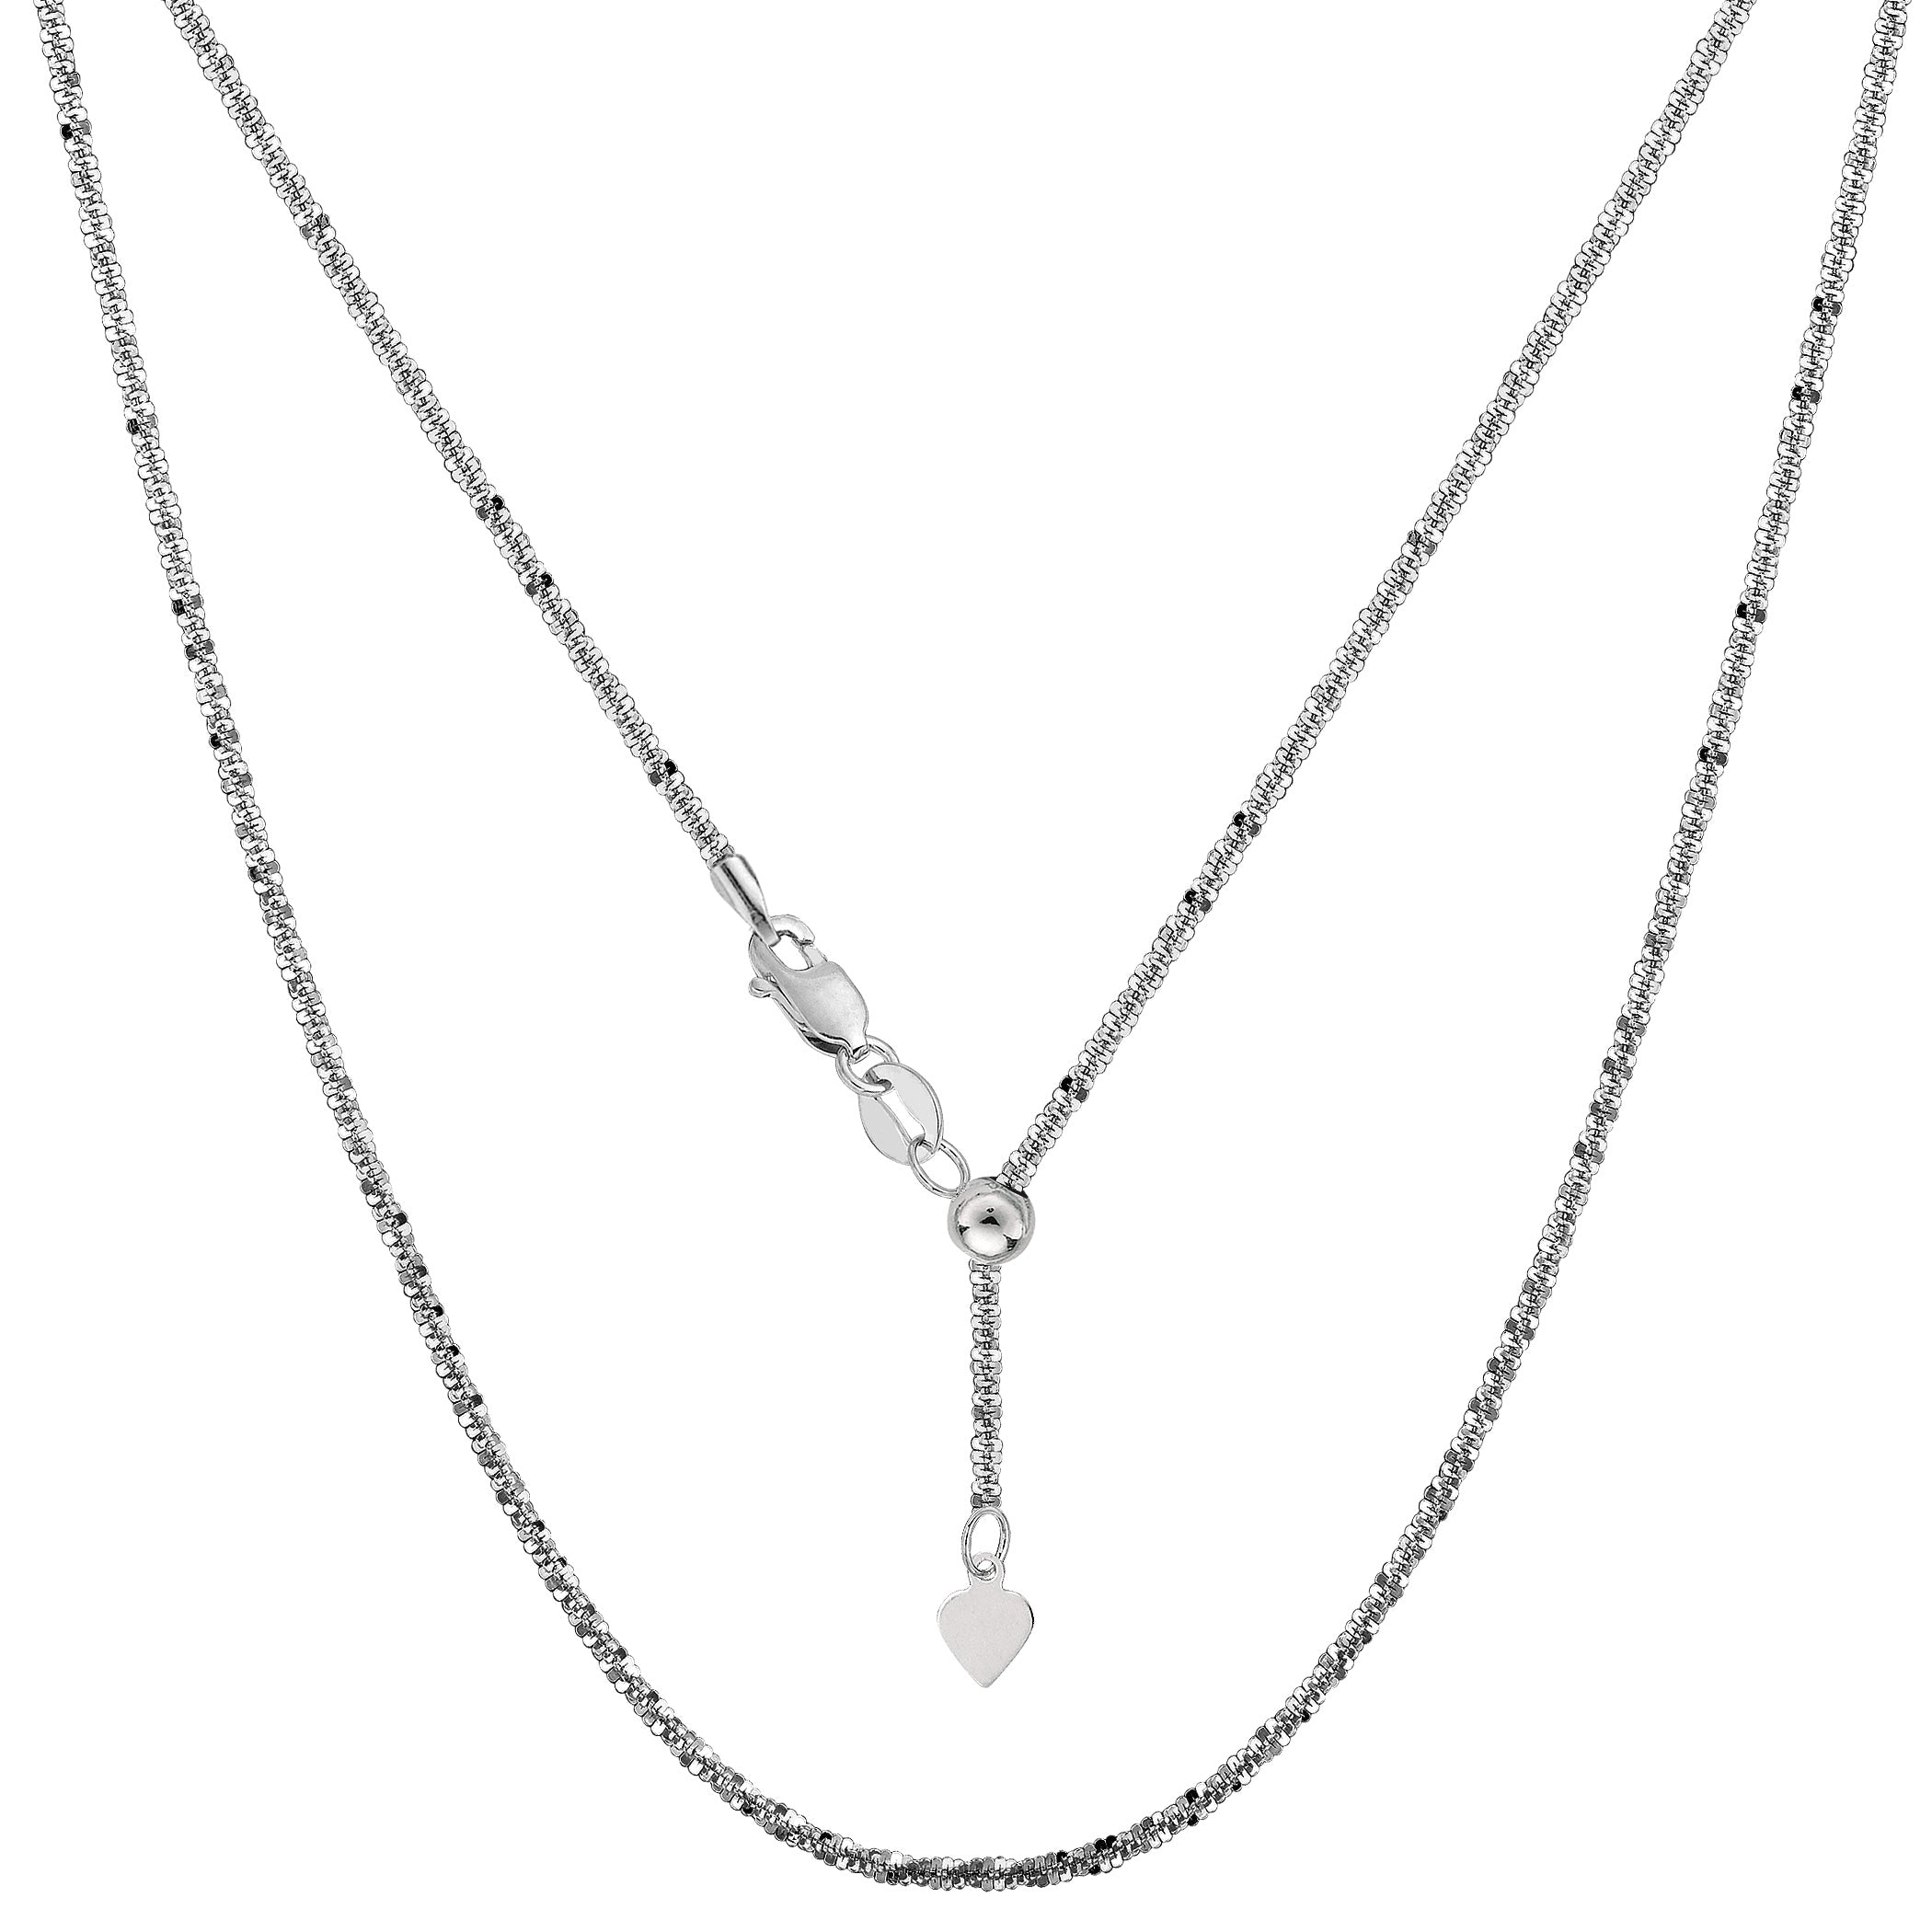 14k White Gold Adjustable Sparkle Chain Necklace, 1.5mm, 22" fine designer jewelry for men and women